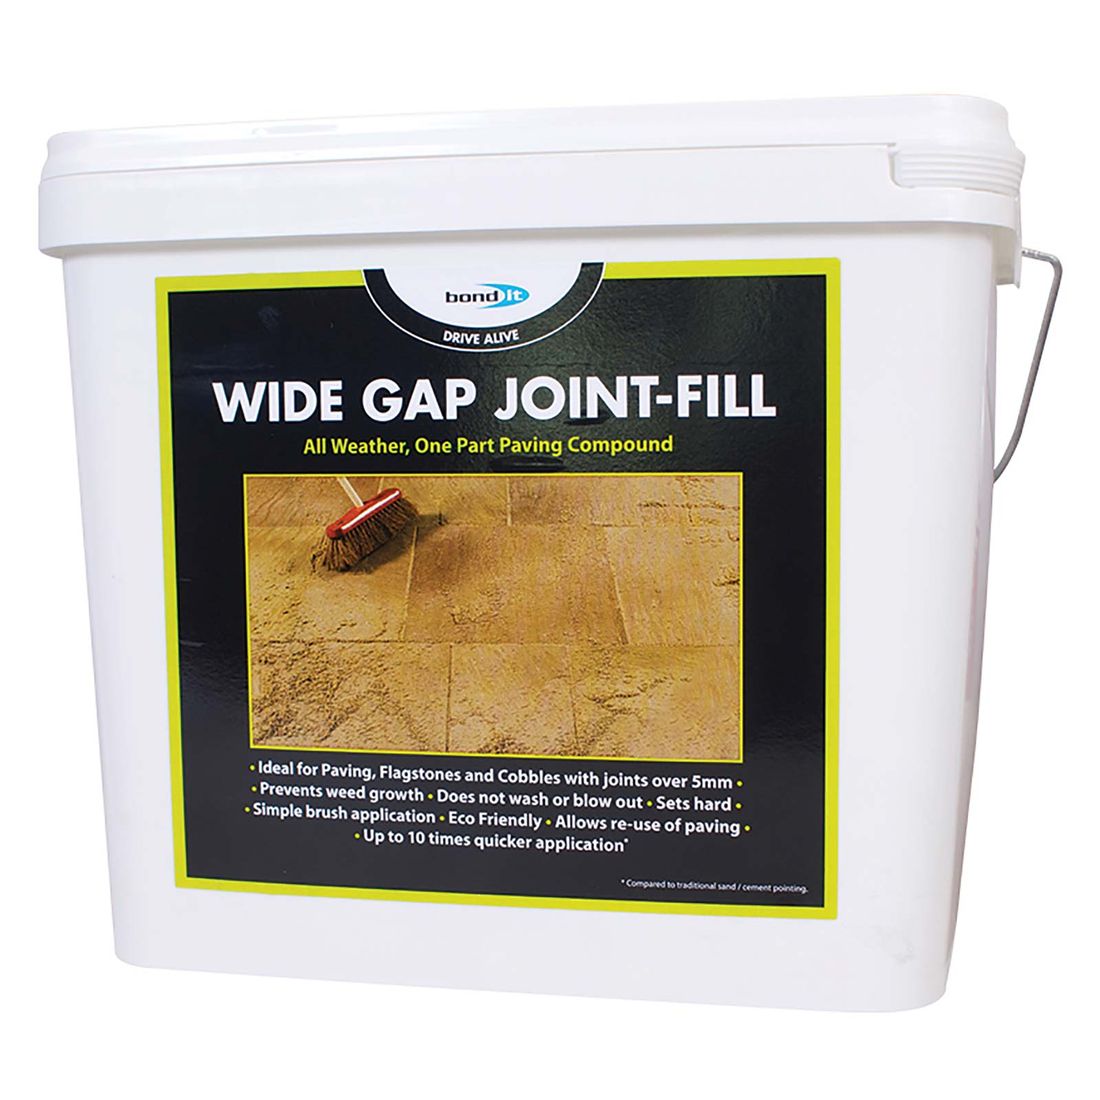 Drivealive Wide Gap Joint-Fill Paving Compound Buff 15Kg